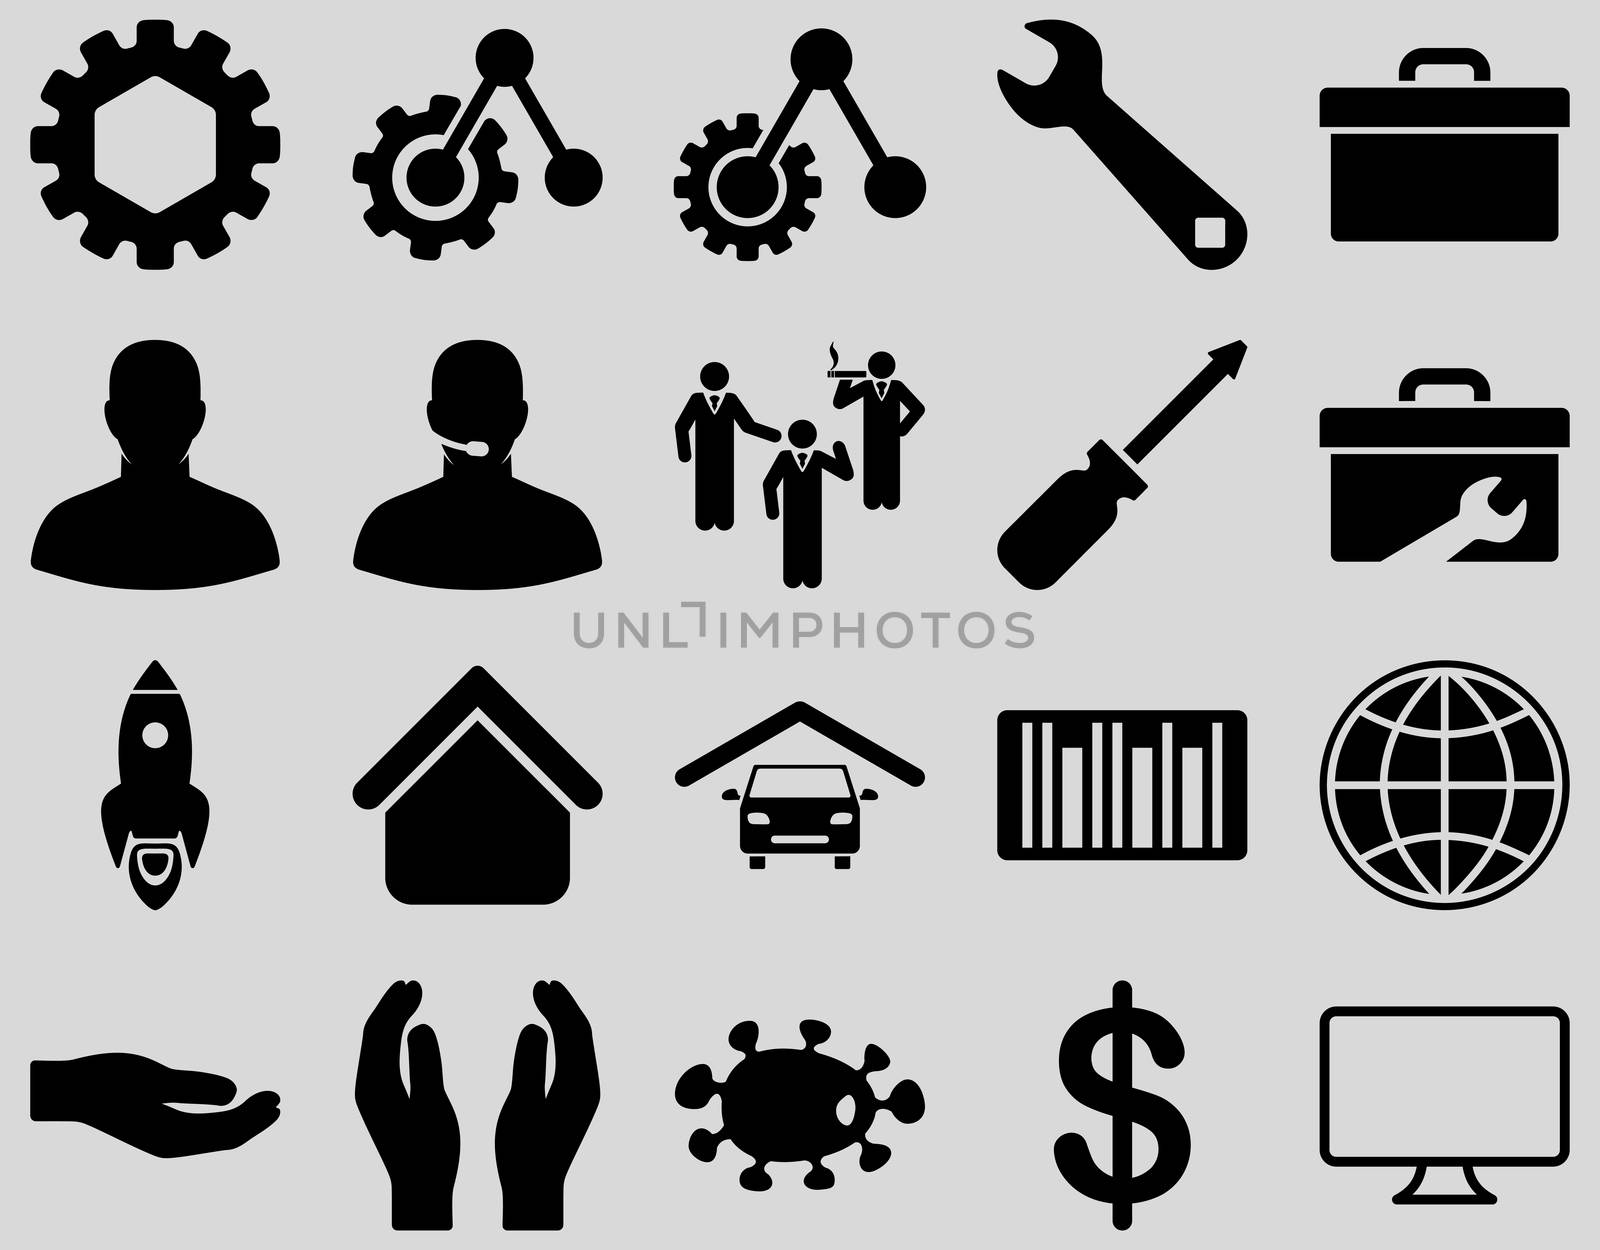 Settings and Tools Icons. Glyph set style is flat images, black color, isolated on a light gray background.